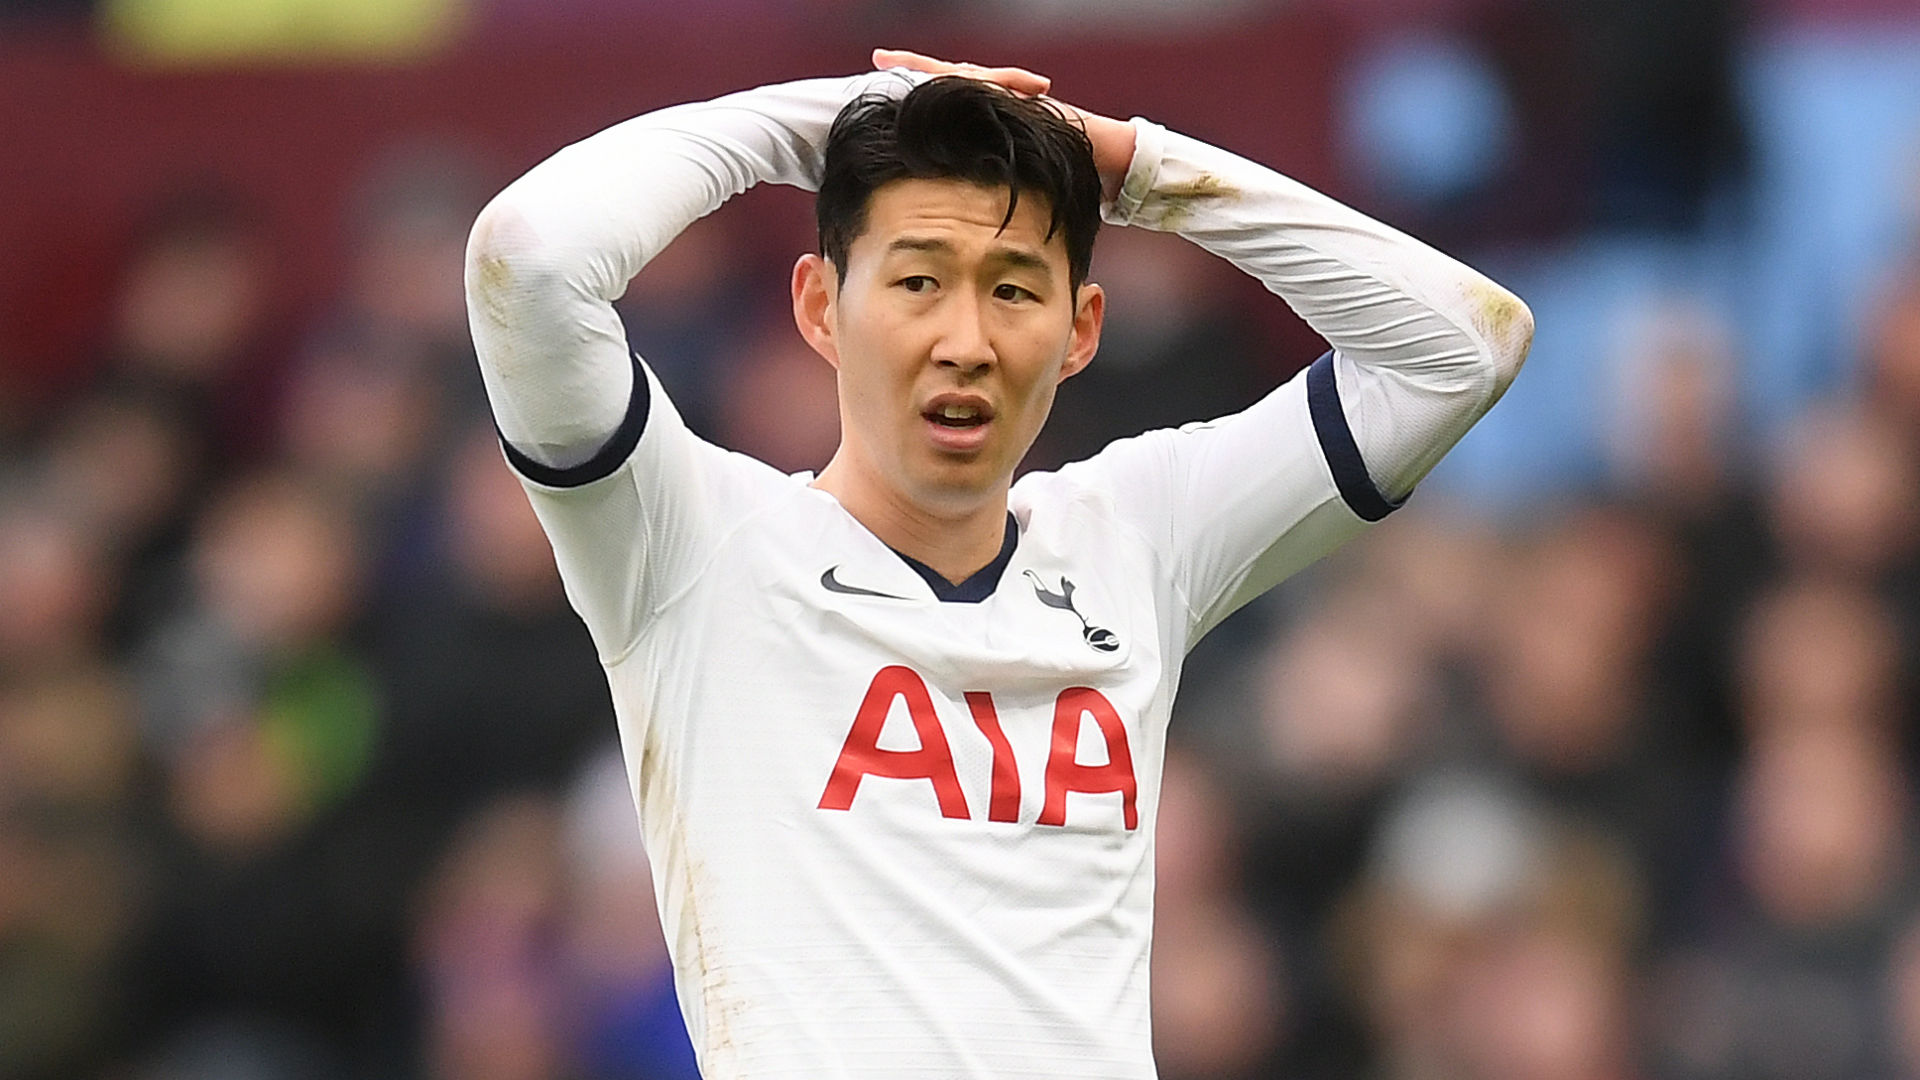 A fractured arm is likely to keep Son Heung-min out for the remainder of the 2019-20 season, Tottenham boss Jose Mourinho has said.